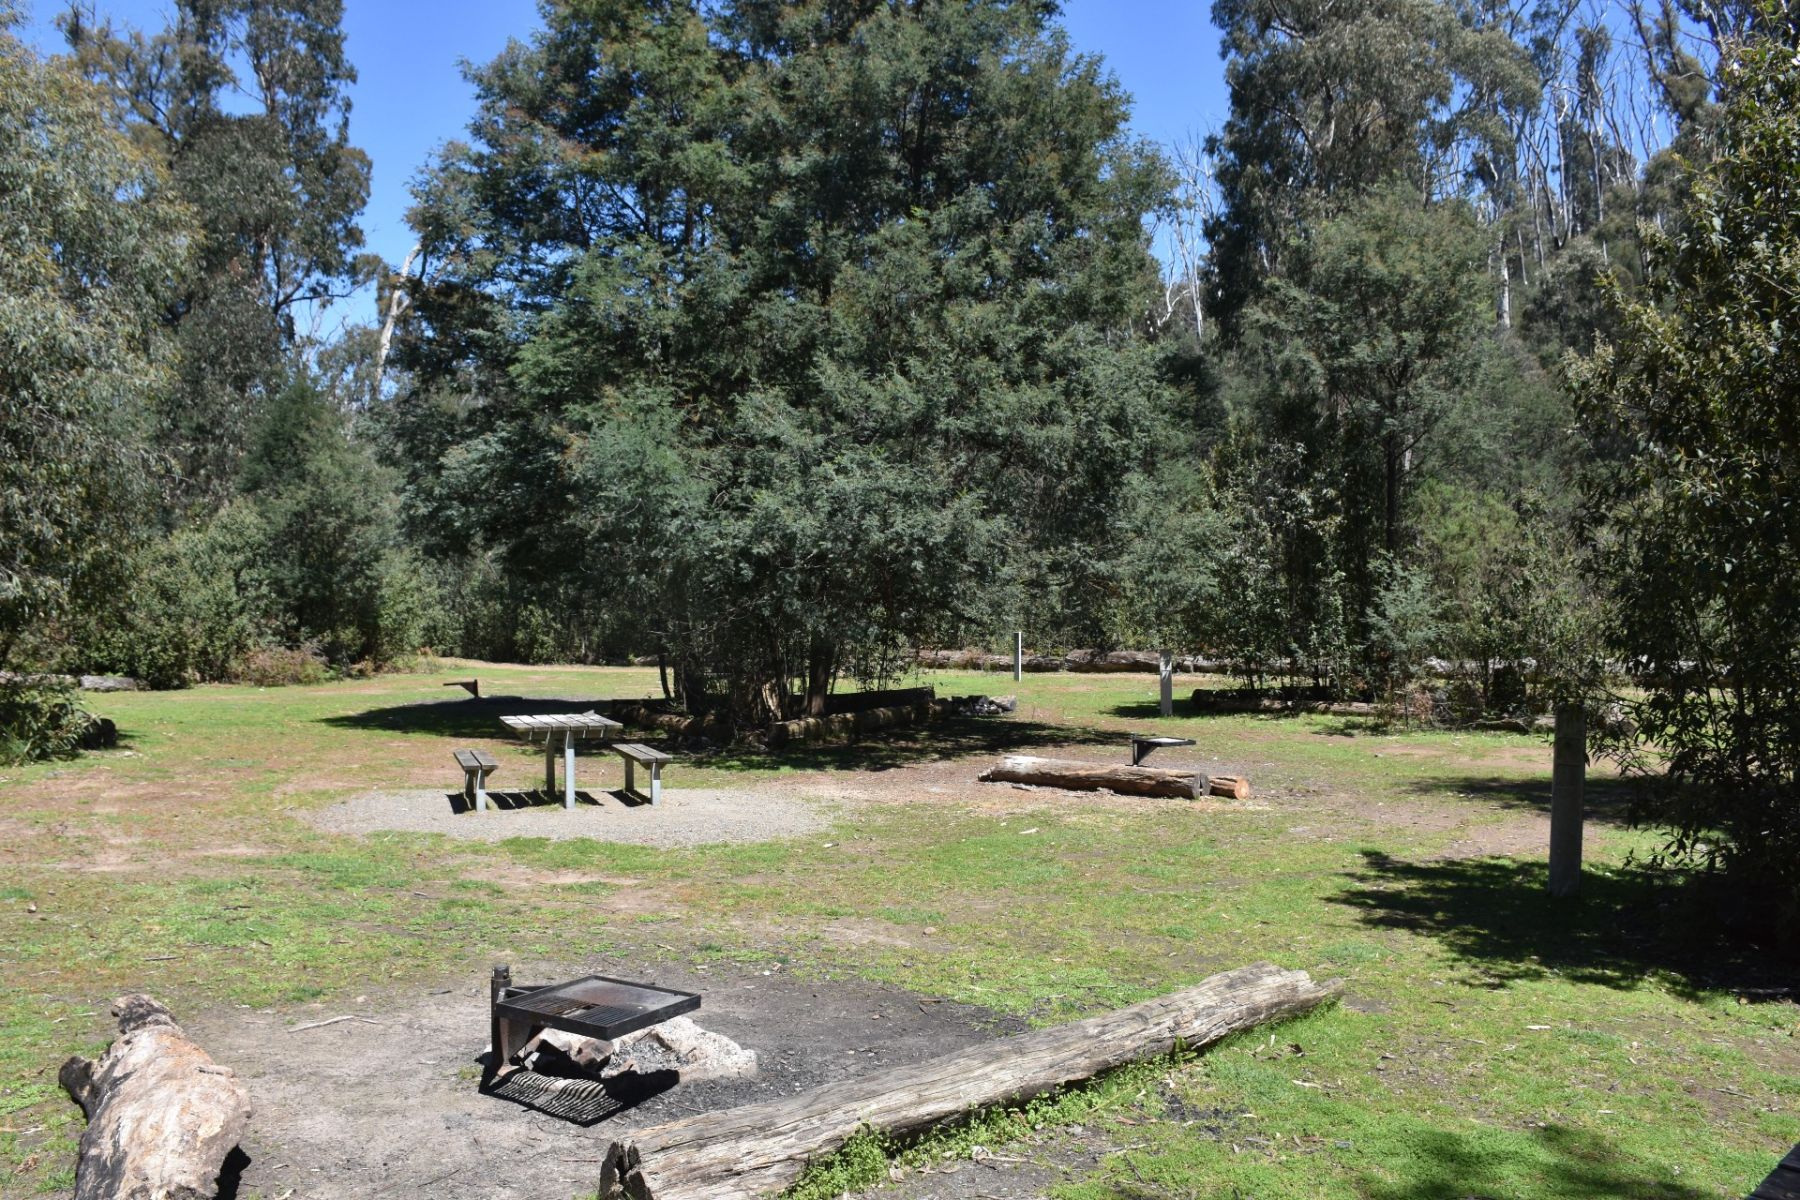 A grassy area with fire pits and a picnic table among trees